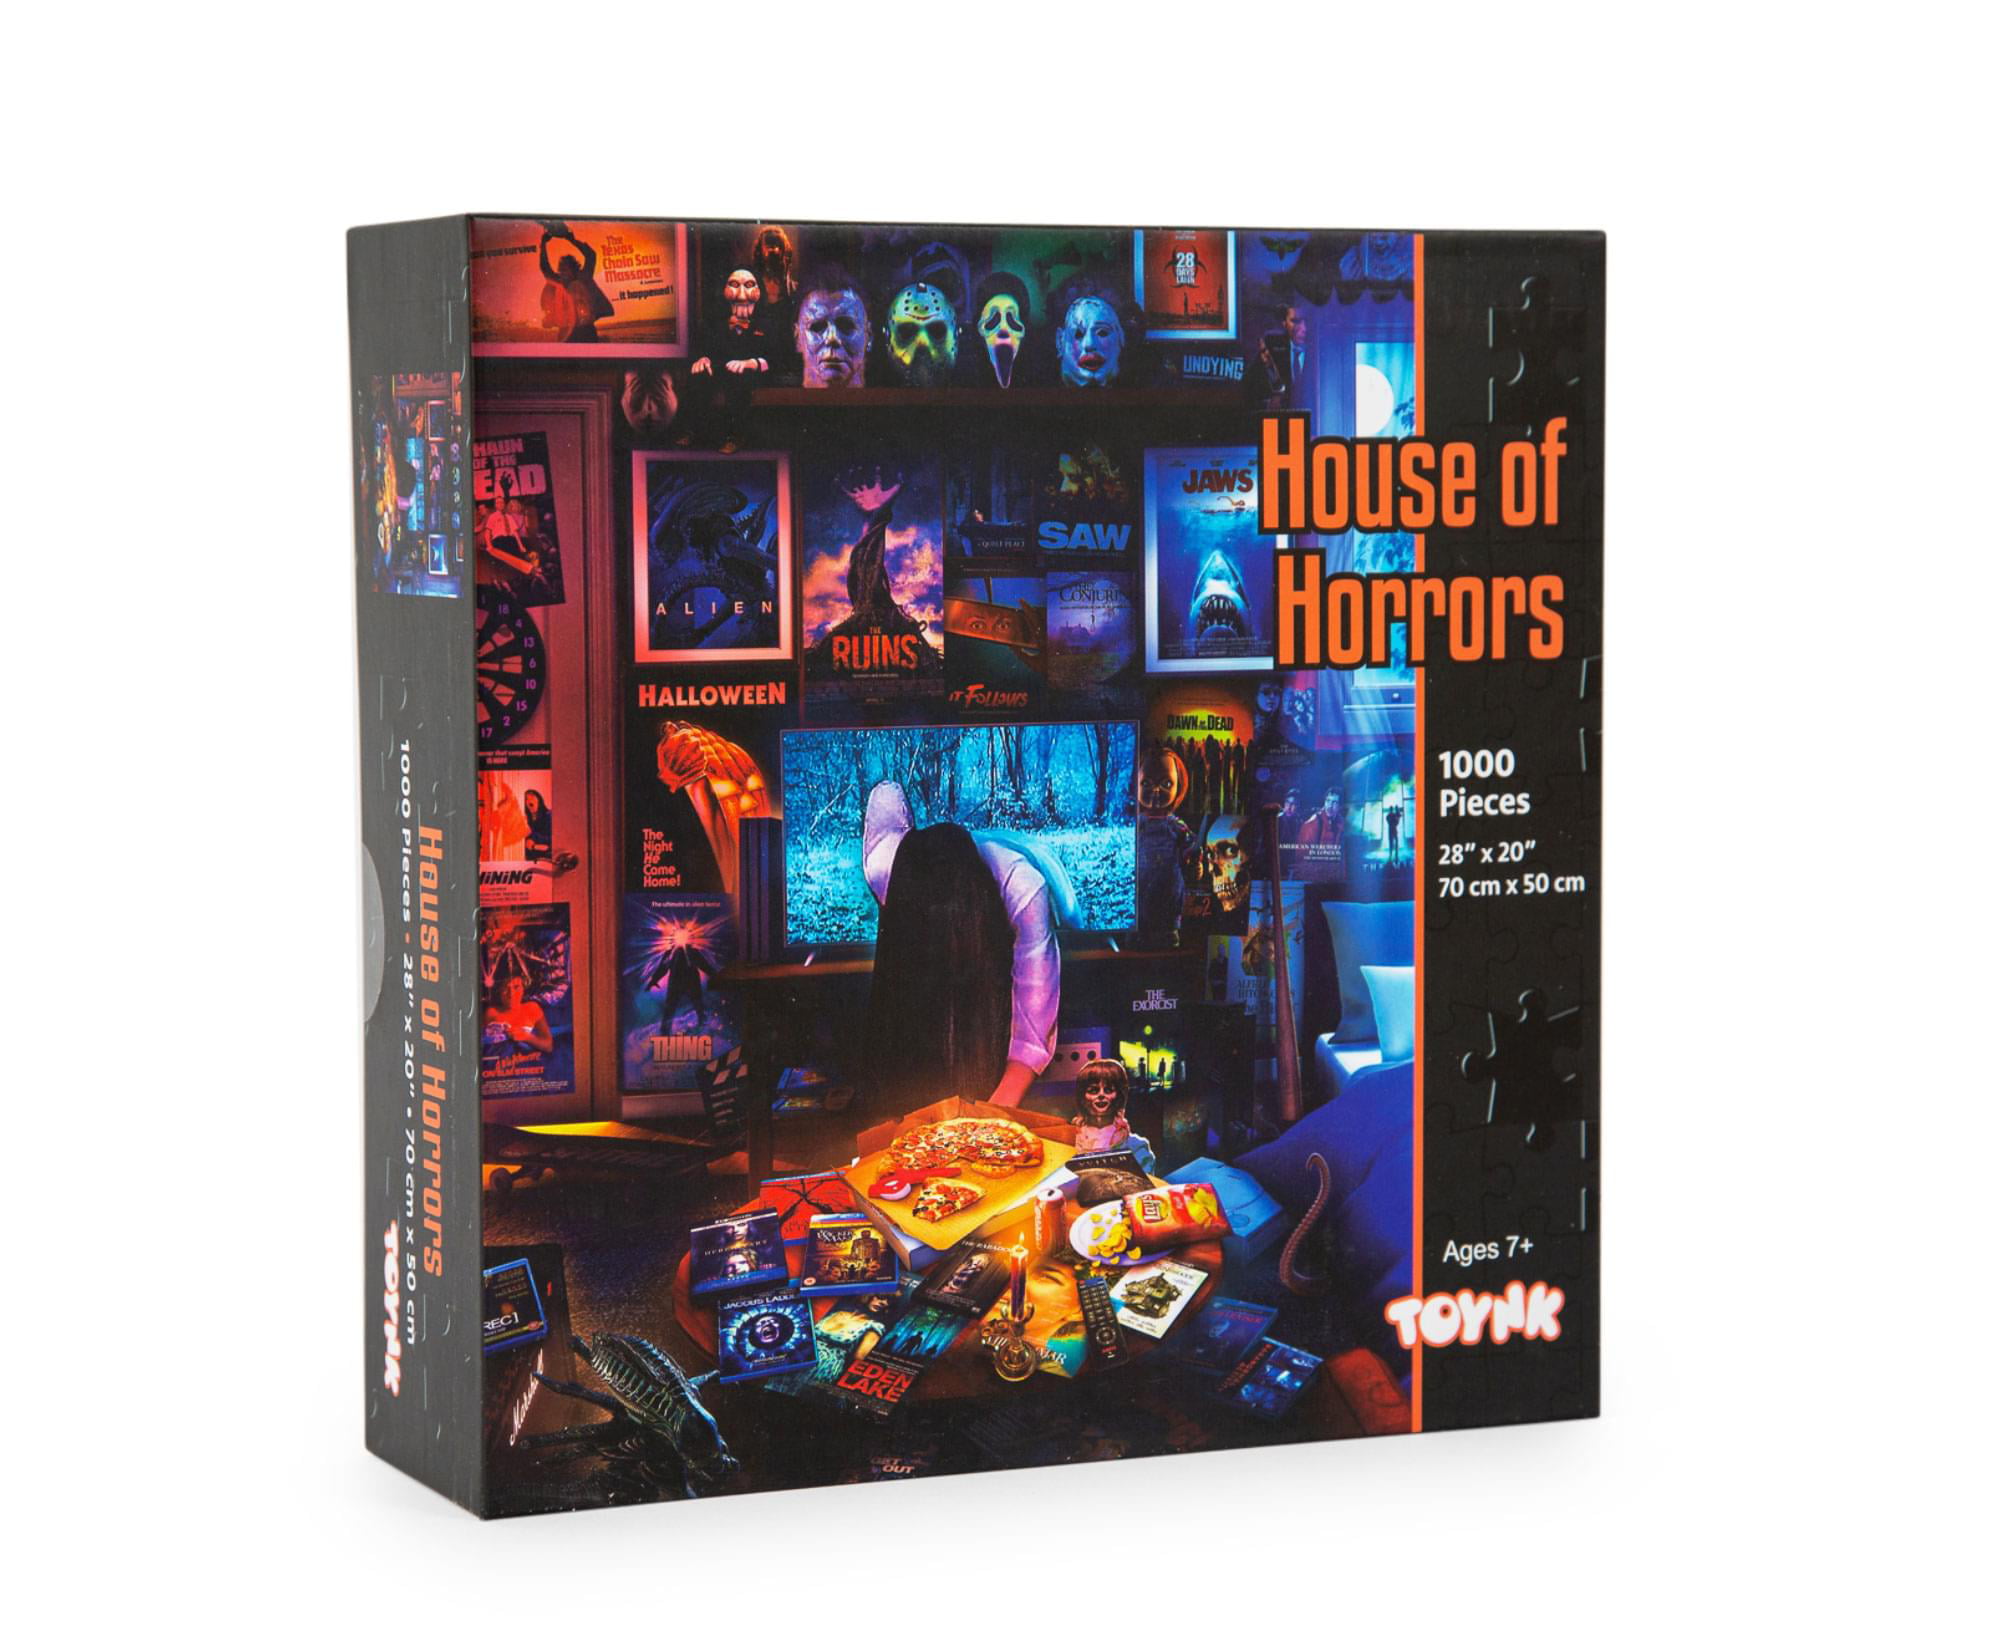 House of Horrors and Scary Movies 1000 Piece Jigsaw Puzzle By 